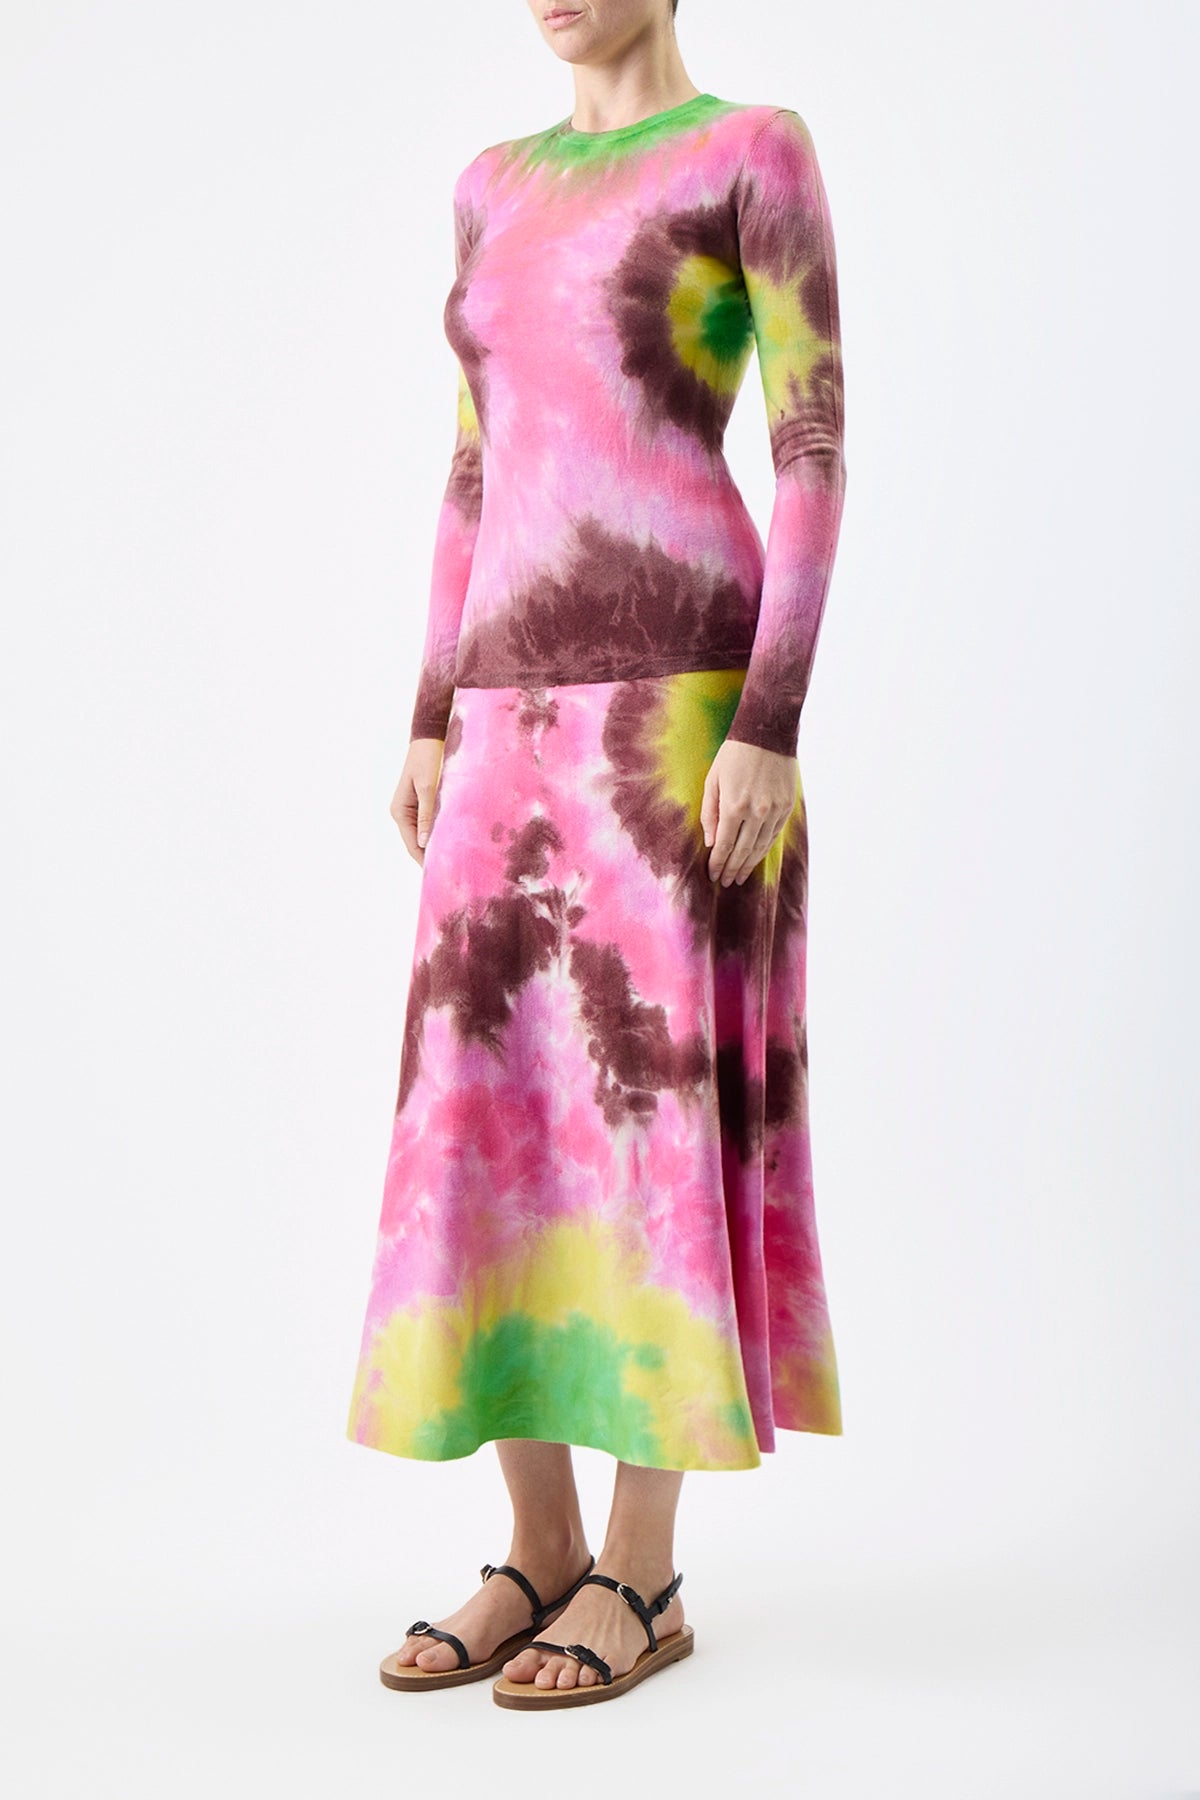 Olive Skirt in Multi Tie Dye Cashmere